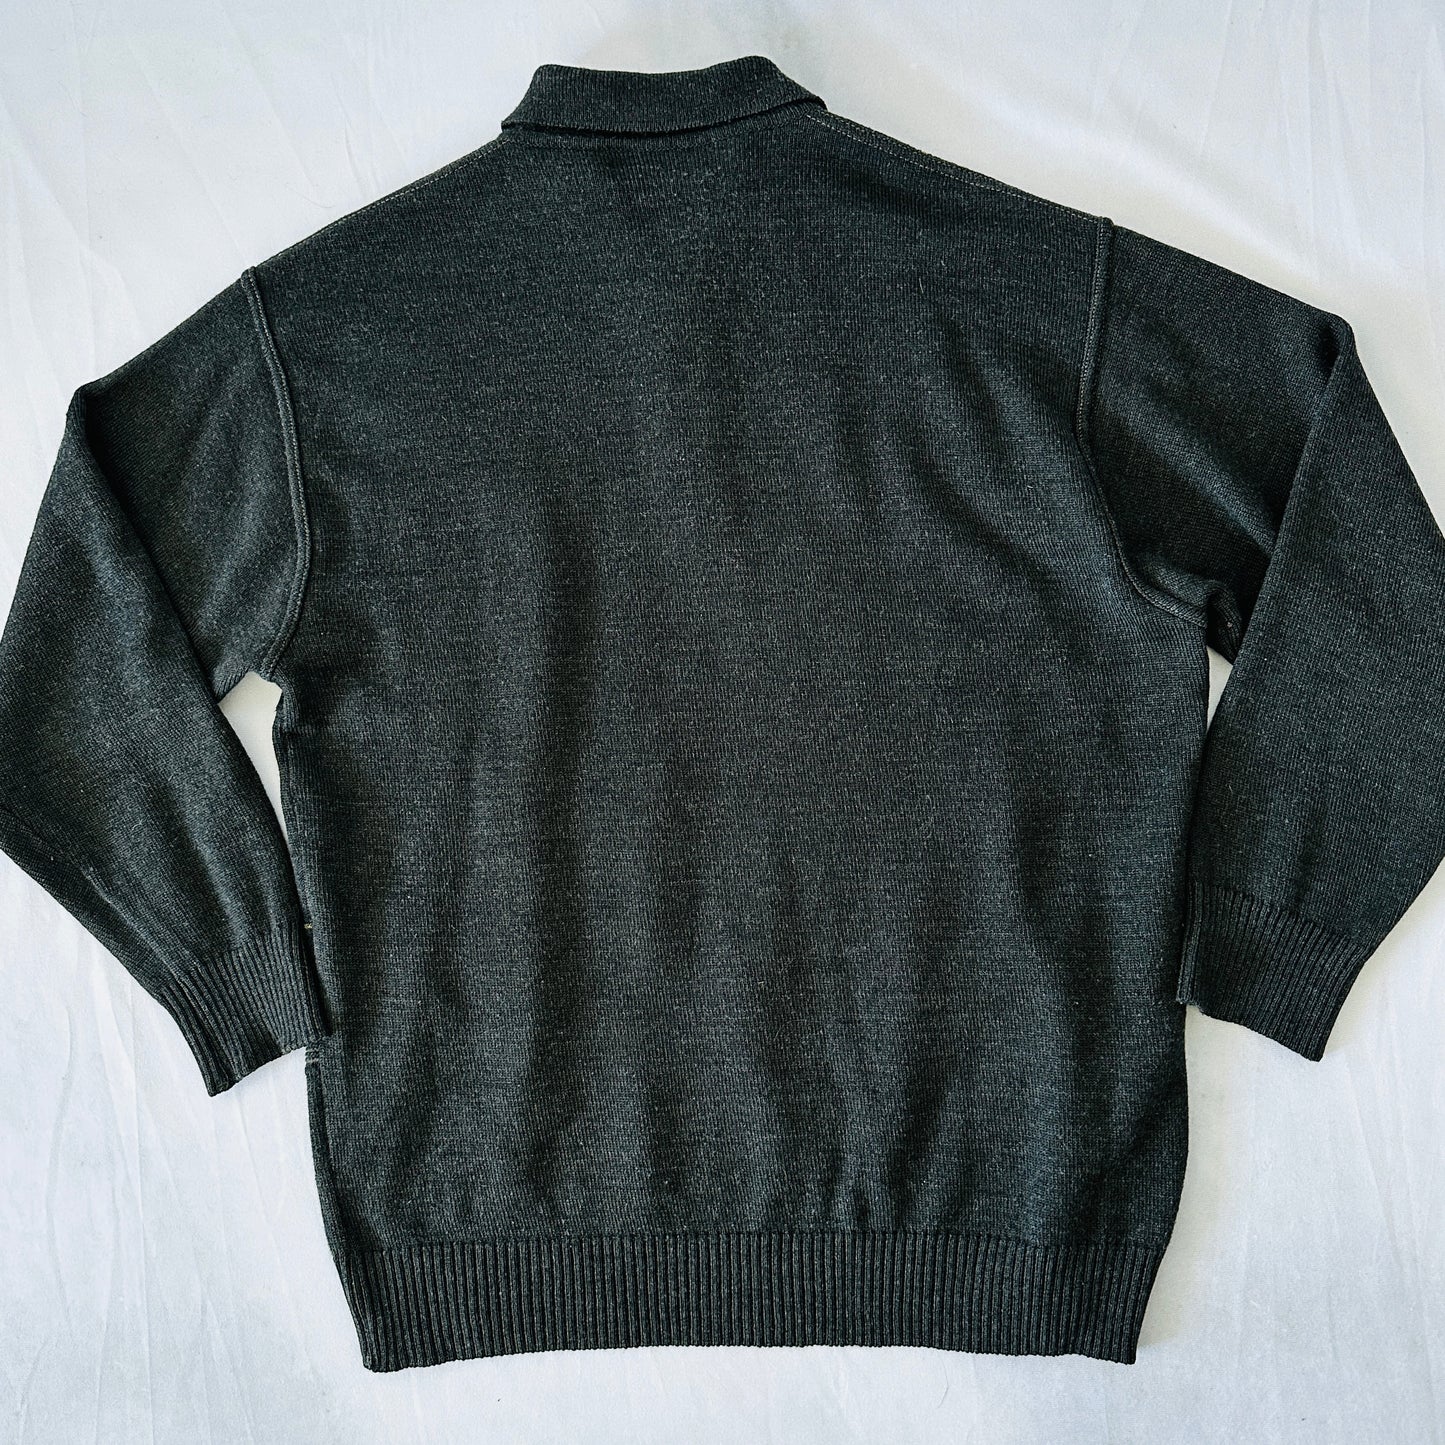 Dardano Vintage Sweater - 52 / L  - Made in Italy